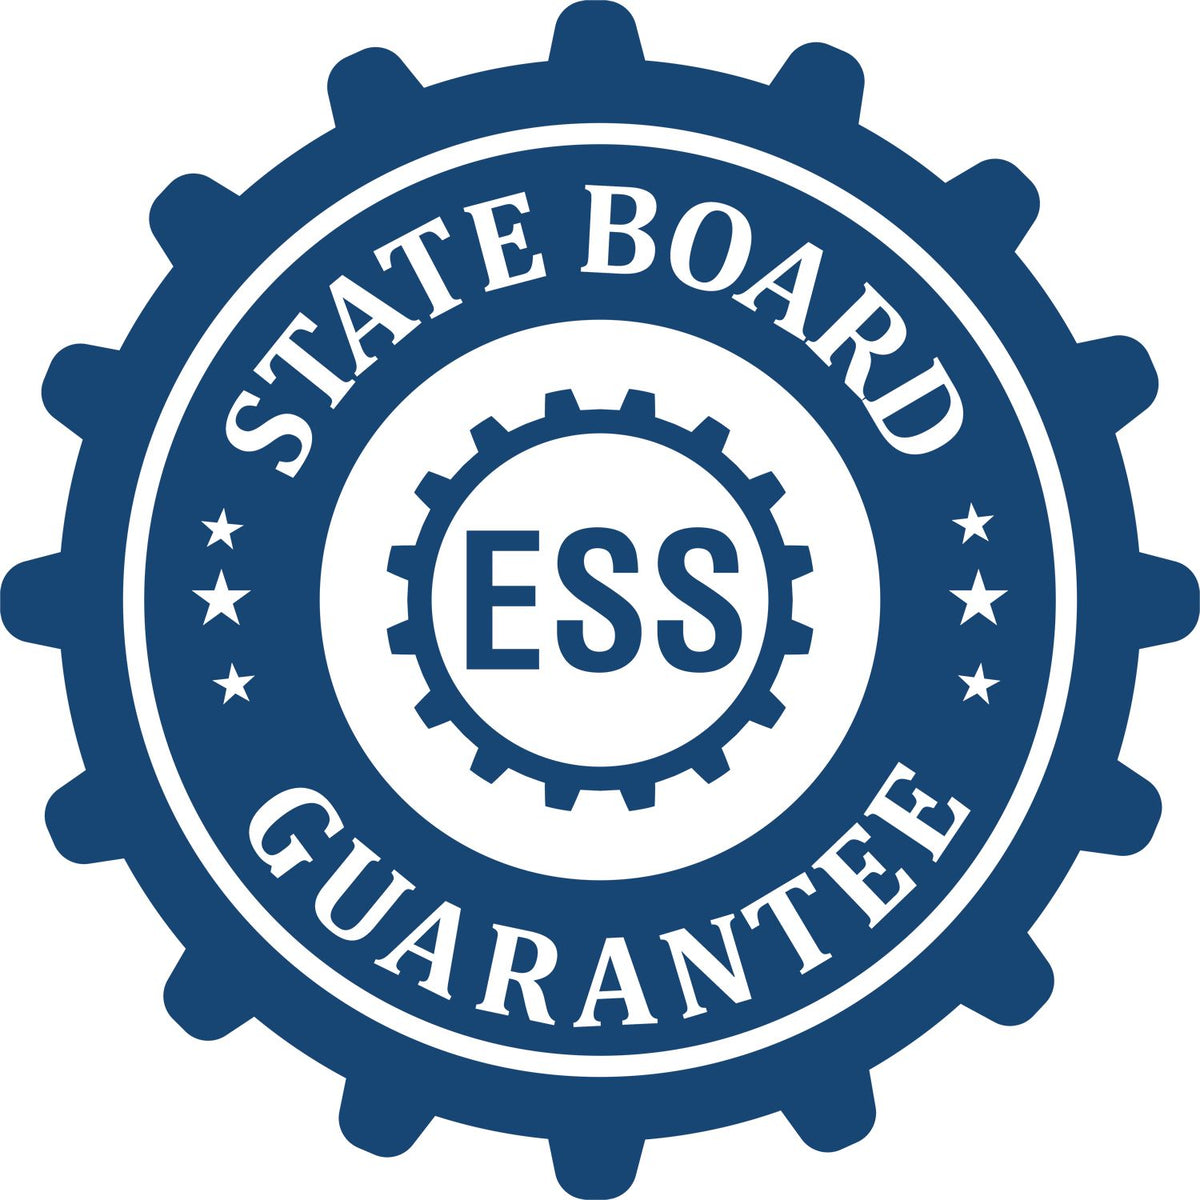 An emblem in a gear shape illustrating a state board guarantee for the Hybrid Michigan Landscape Architect Seal